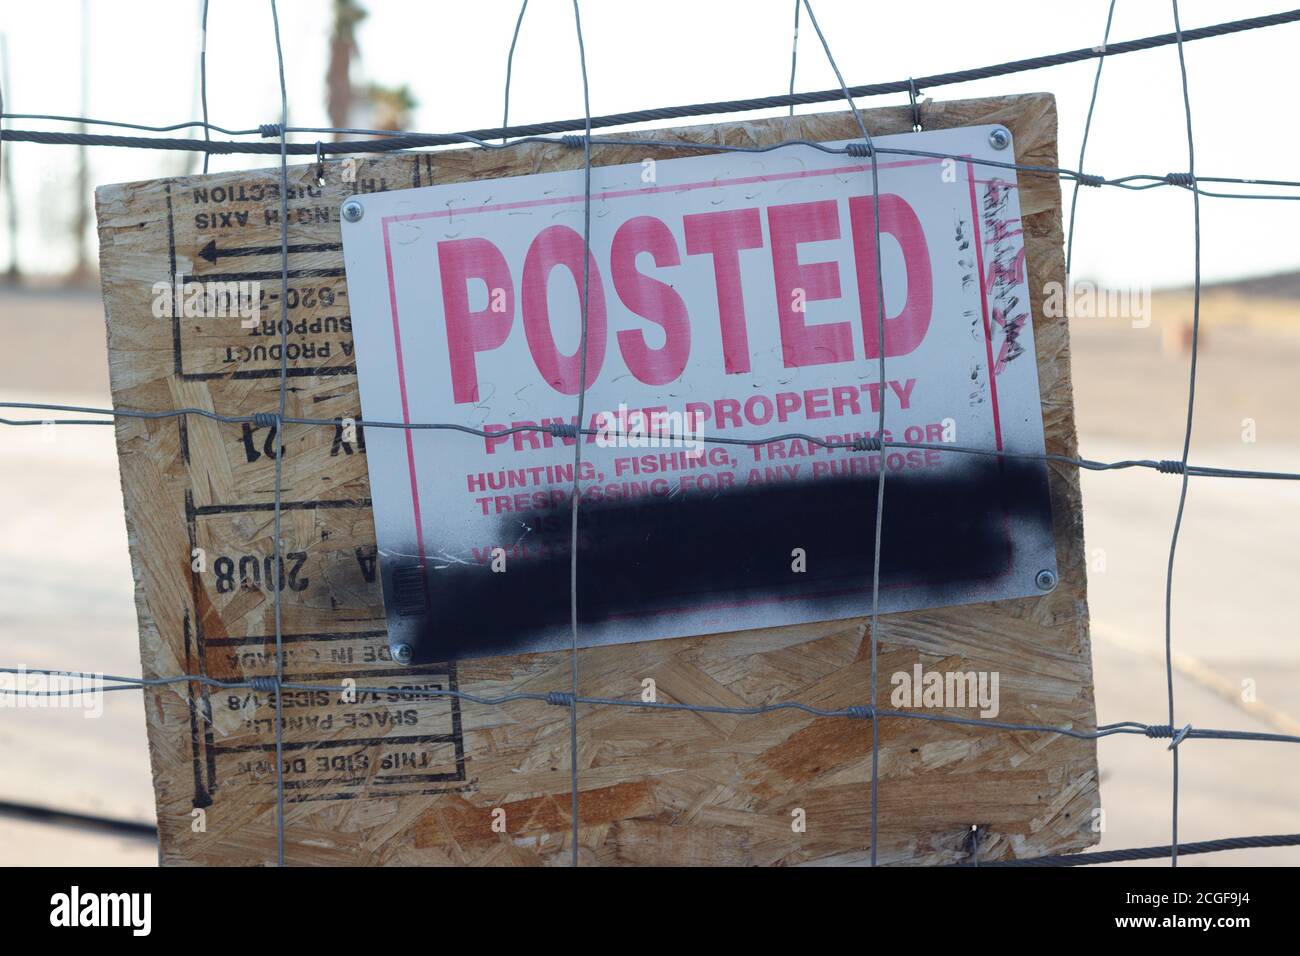 Posted private property sign at the abandoned Lake Dolores Waterpark, Newberry Springs, CA. Stock Photo